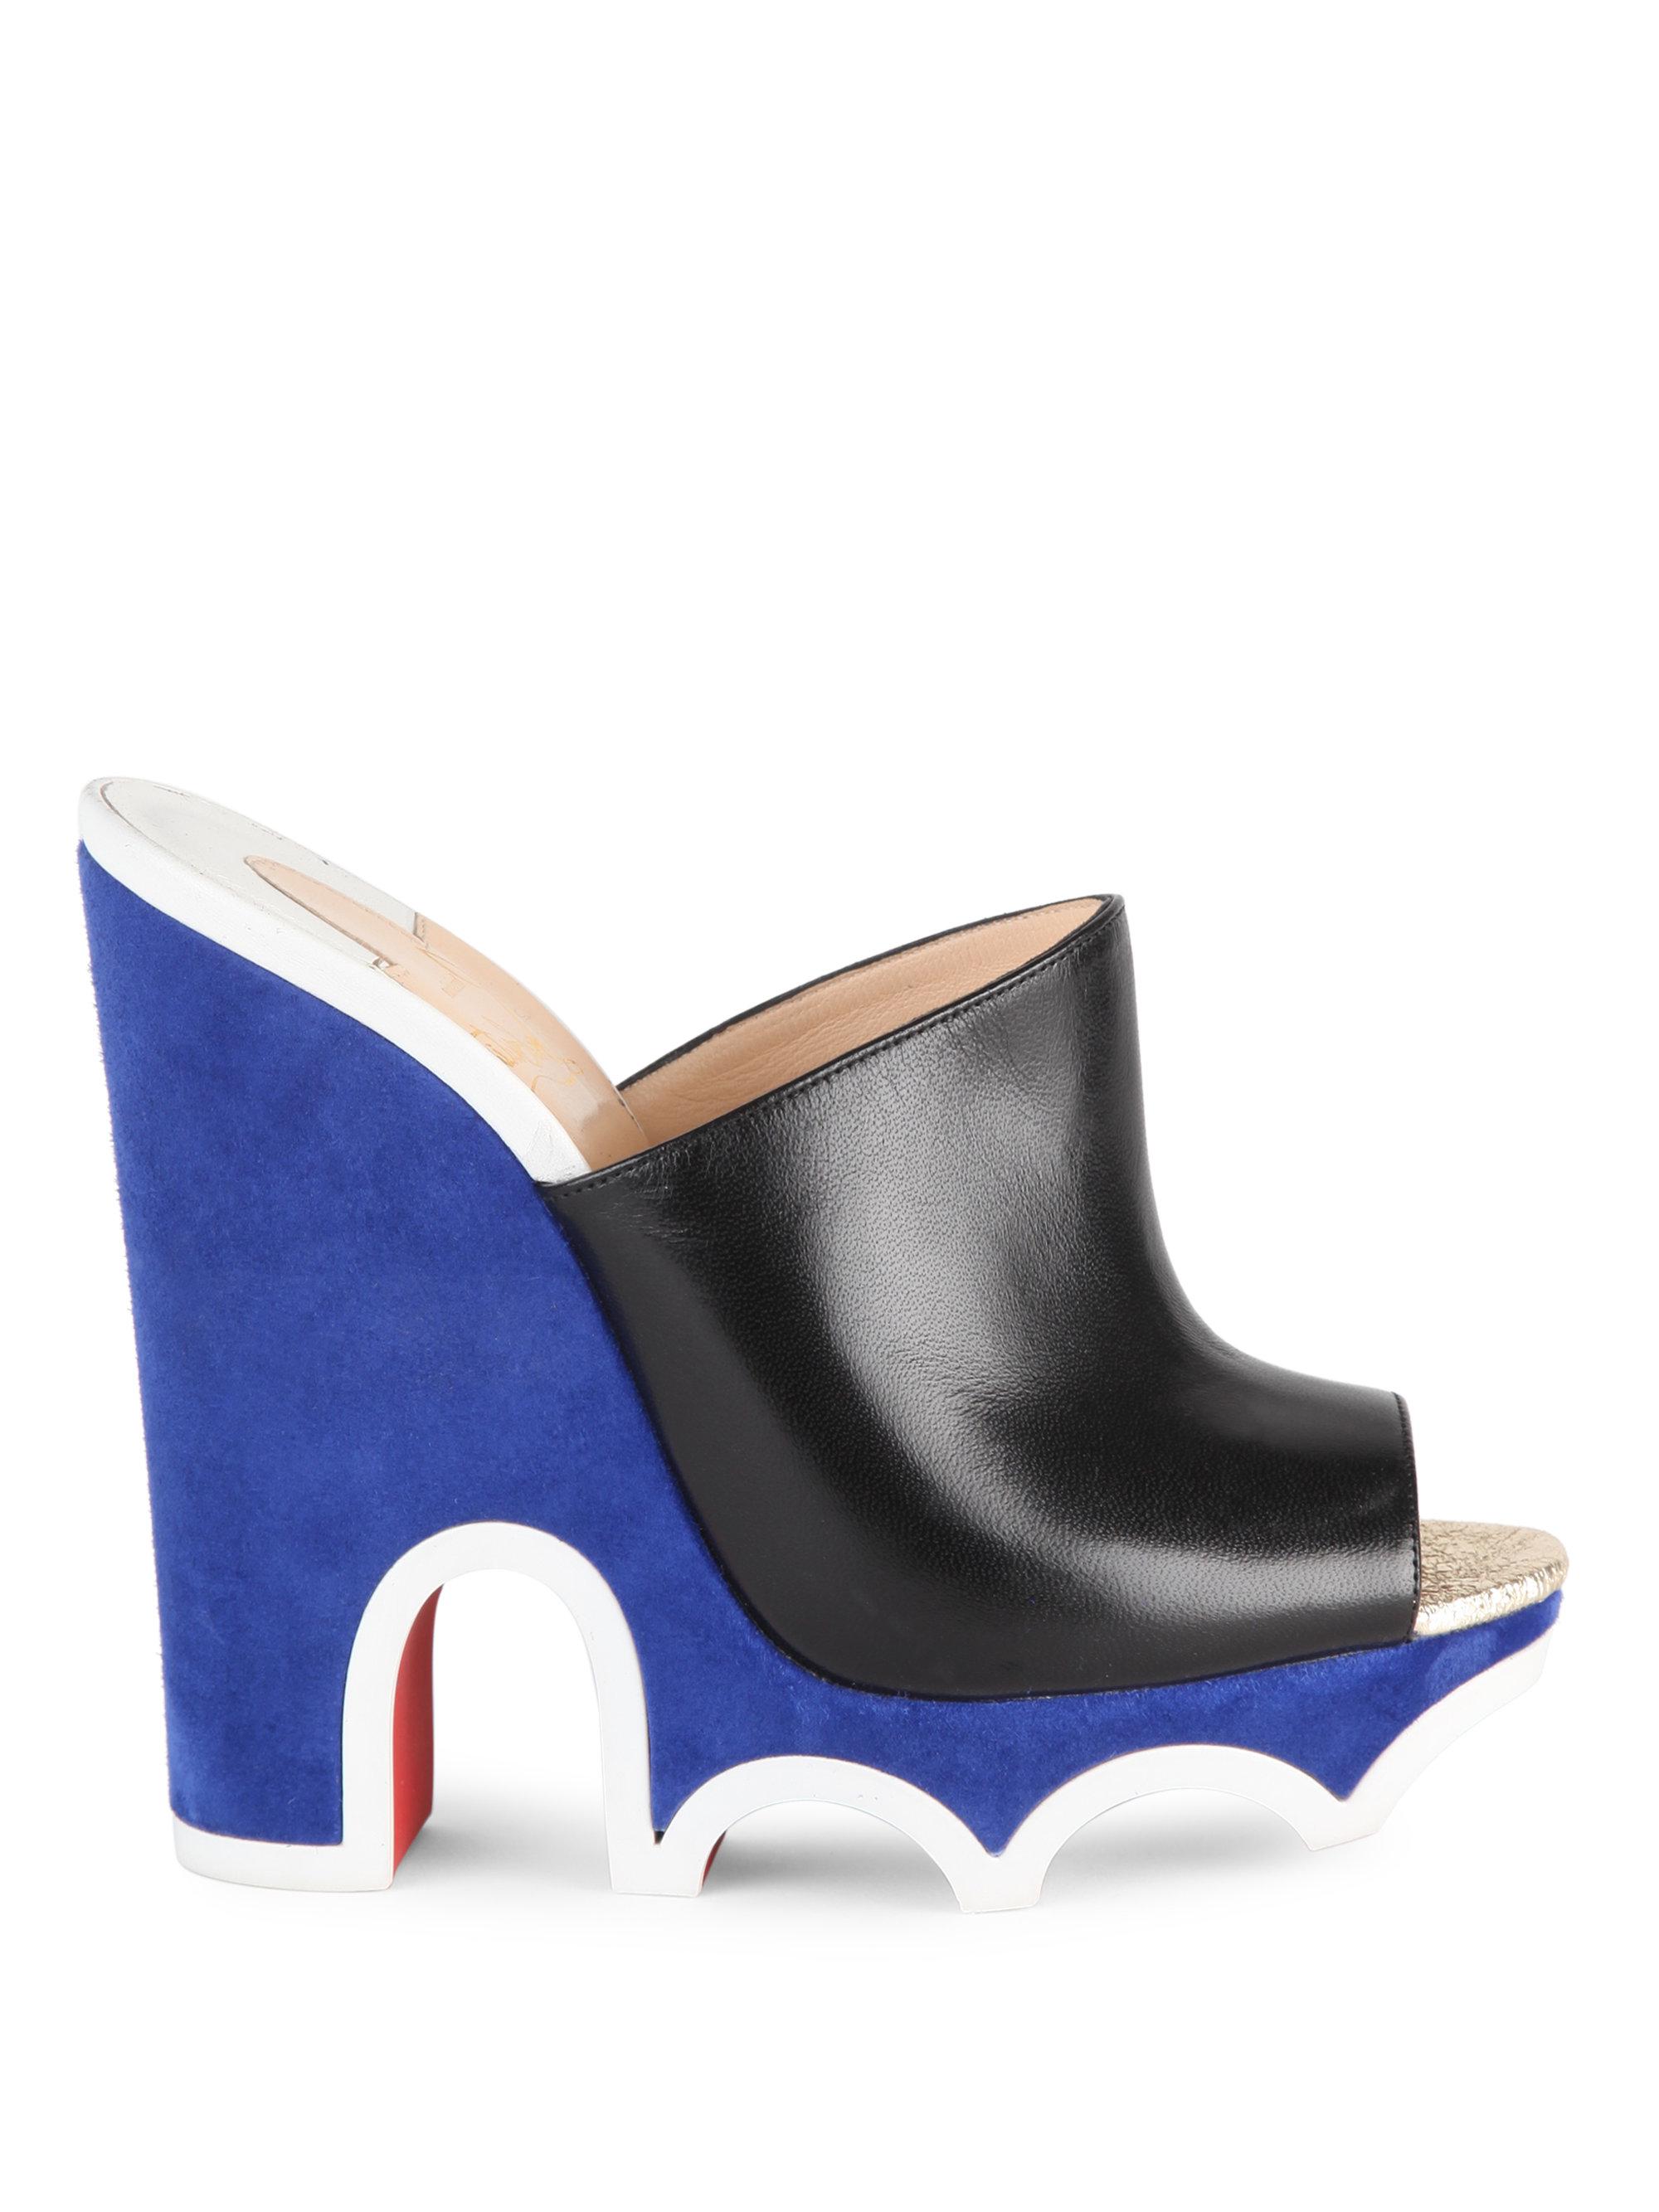 Christian Louboutin Mulacramp 140 Leather Wedge Mules - Lyst